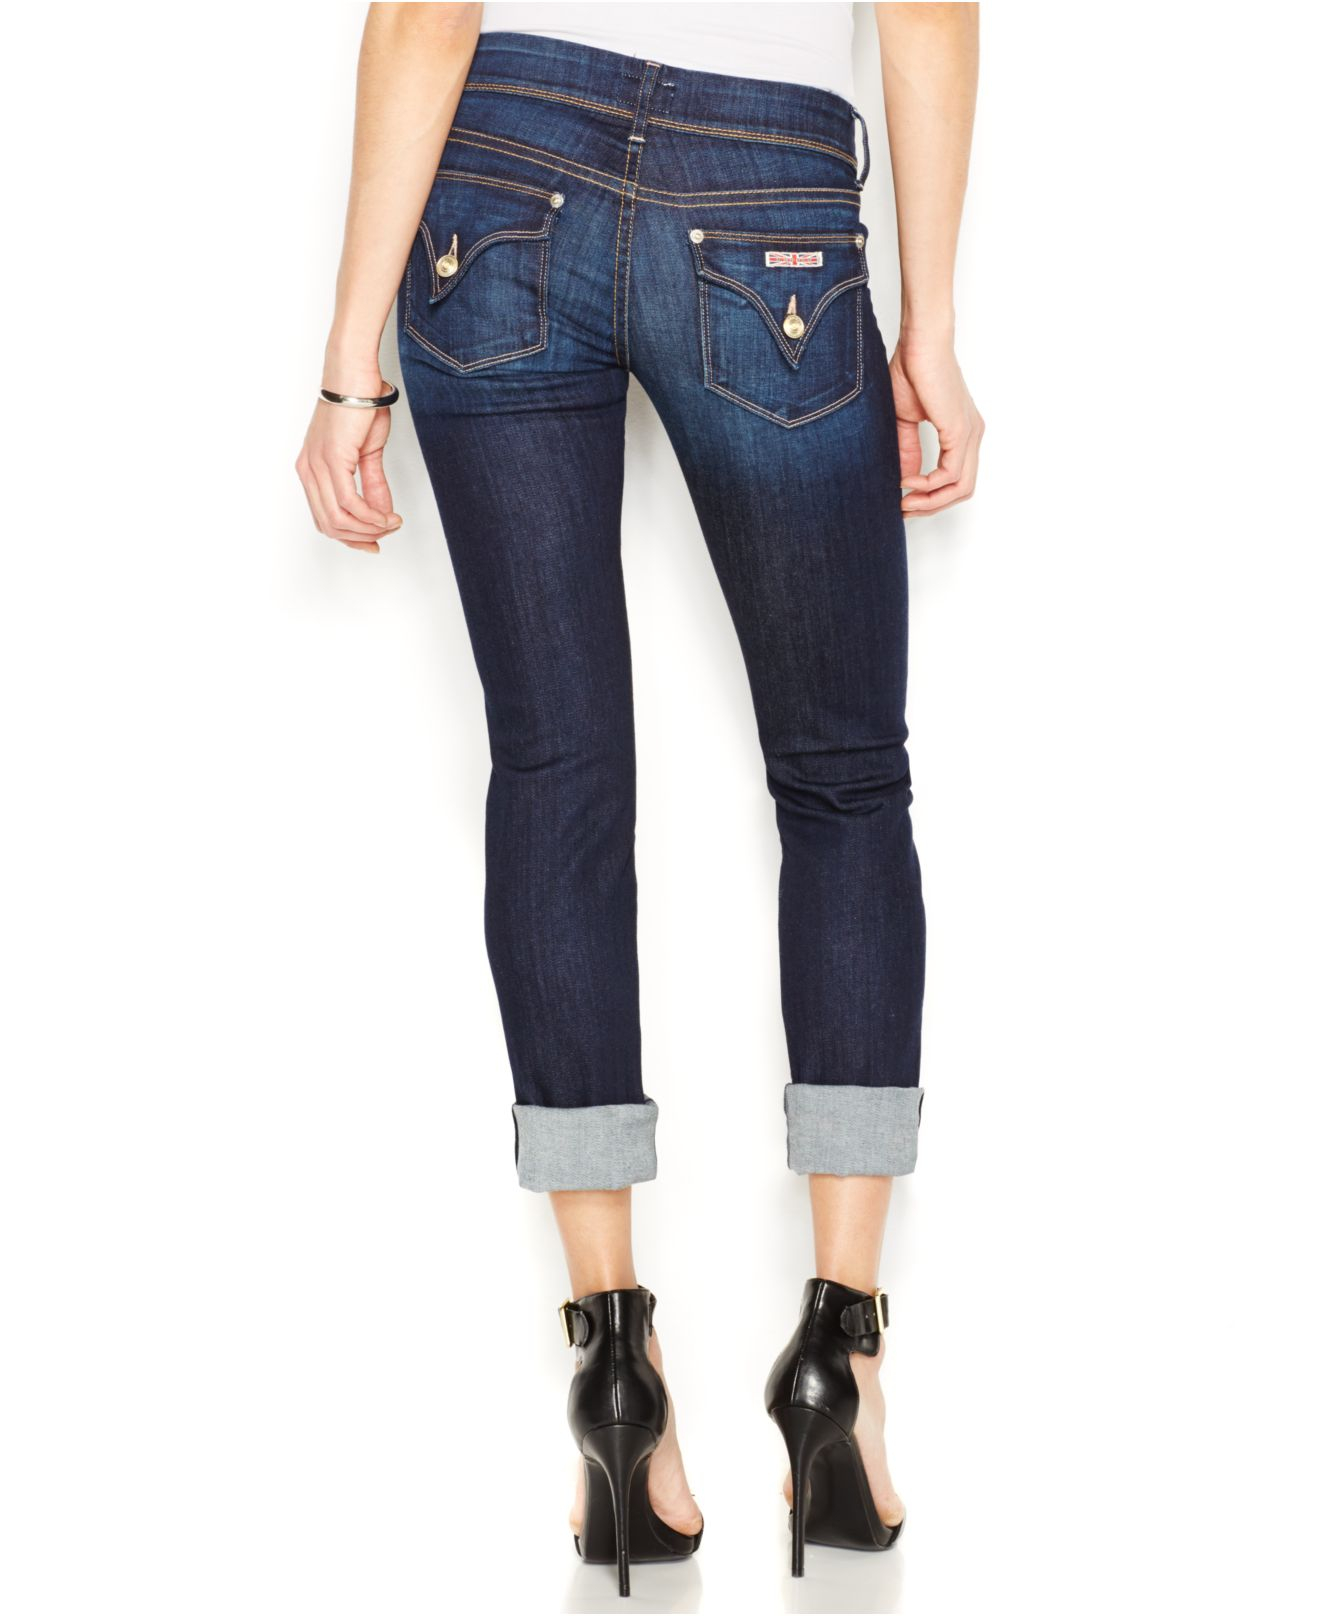 Lyst - Hudson jeans Ginny Straight-leg Slim-fit Crop Jeans in Blue